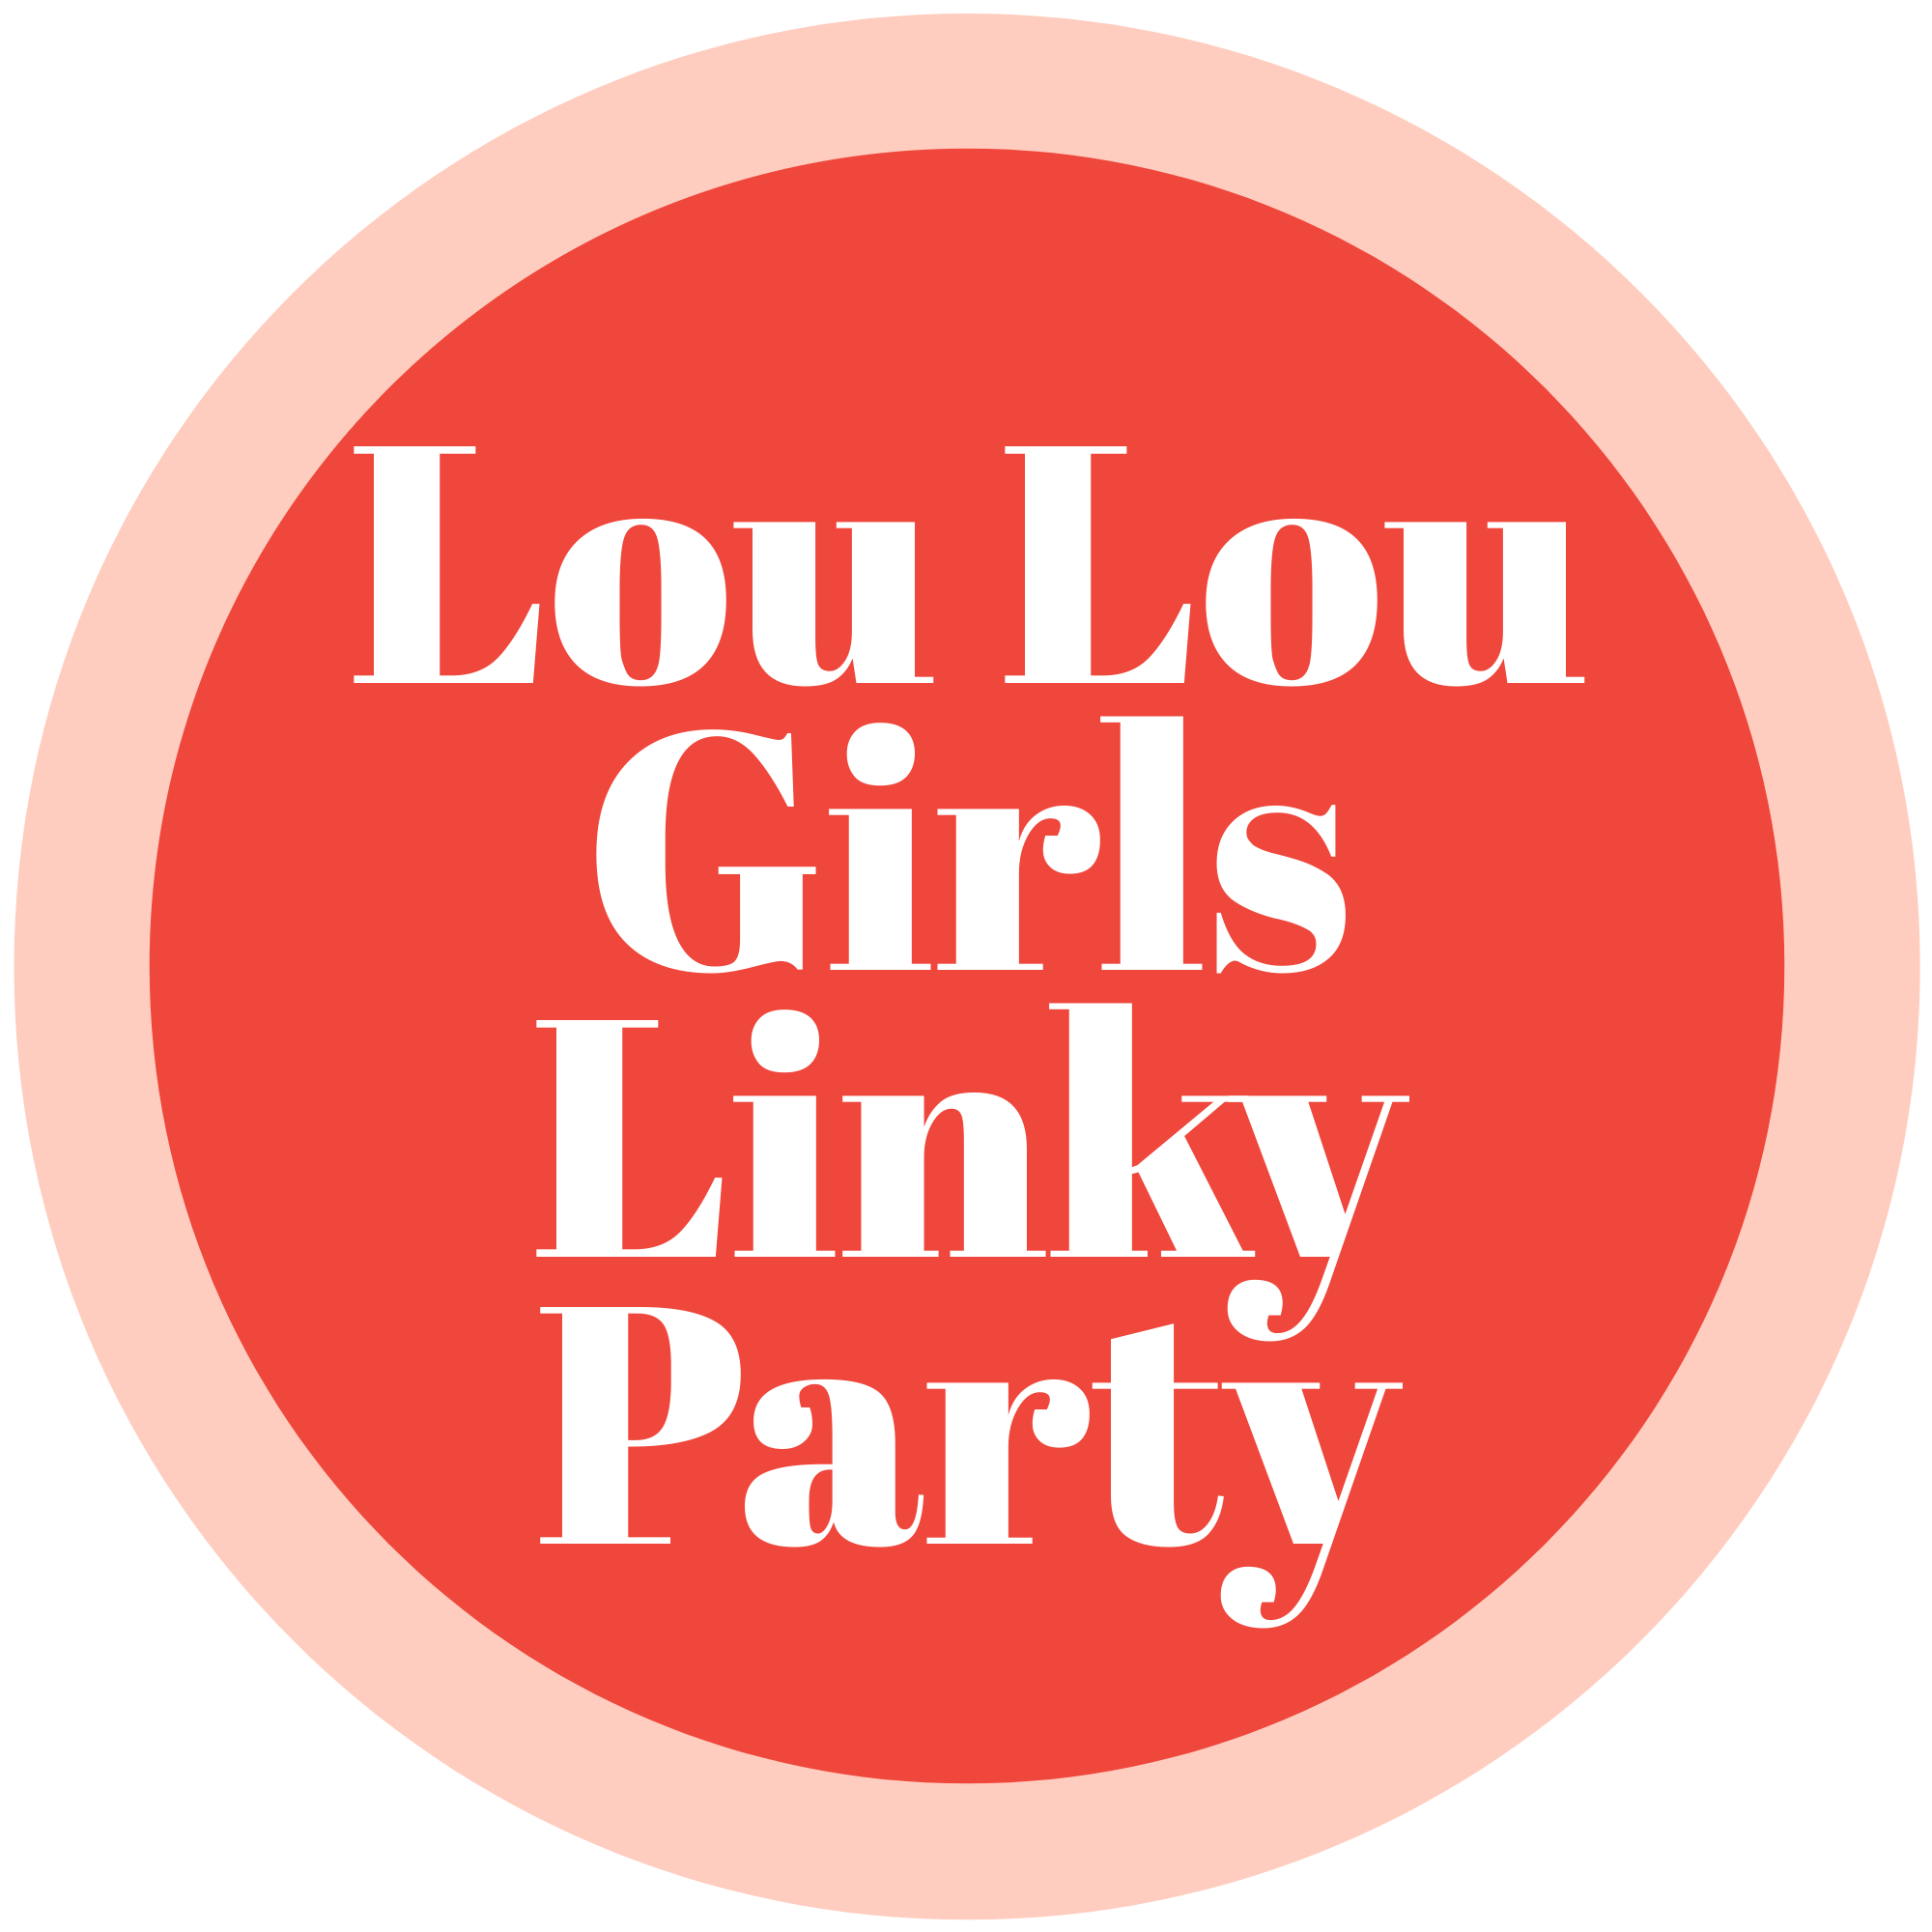 Lou Lou Girls Fabulous Party 512 #linkyparty #bloghop #linkyparties